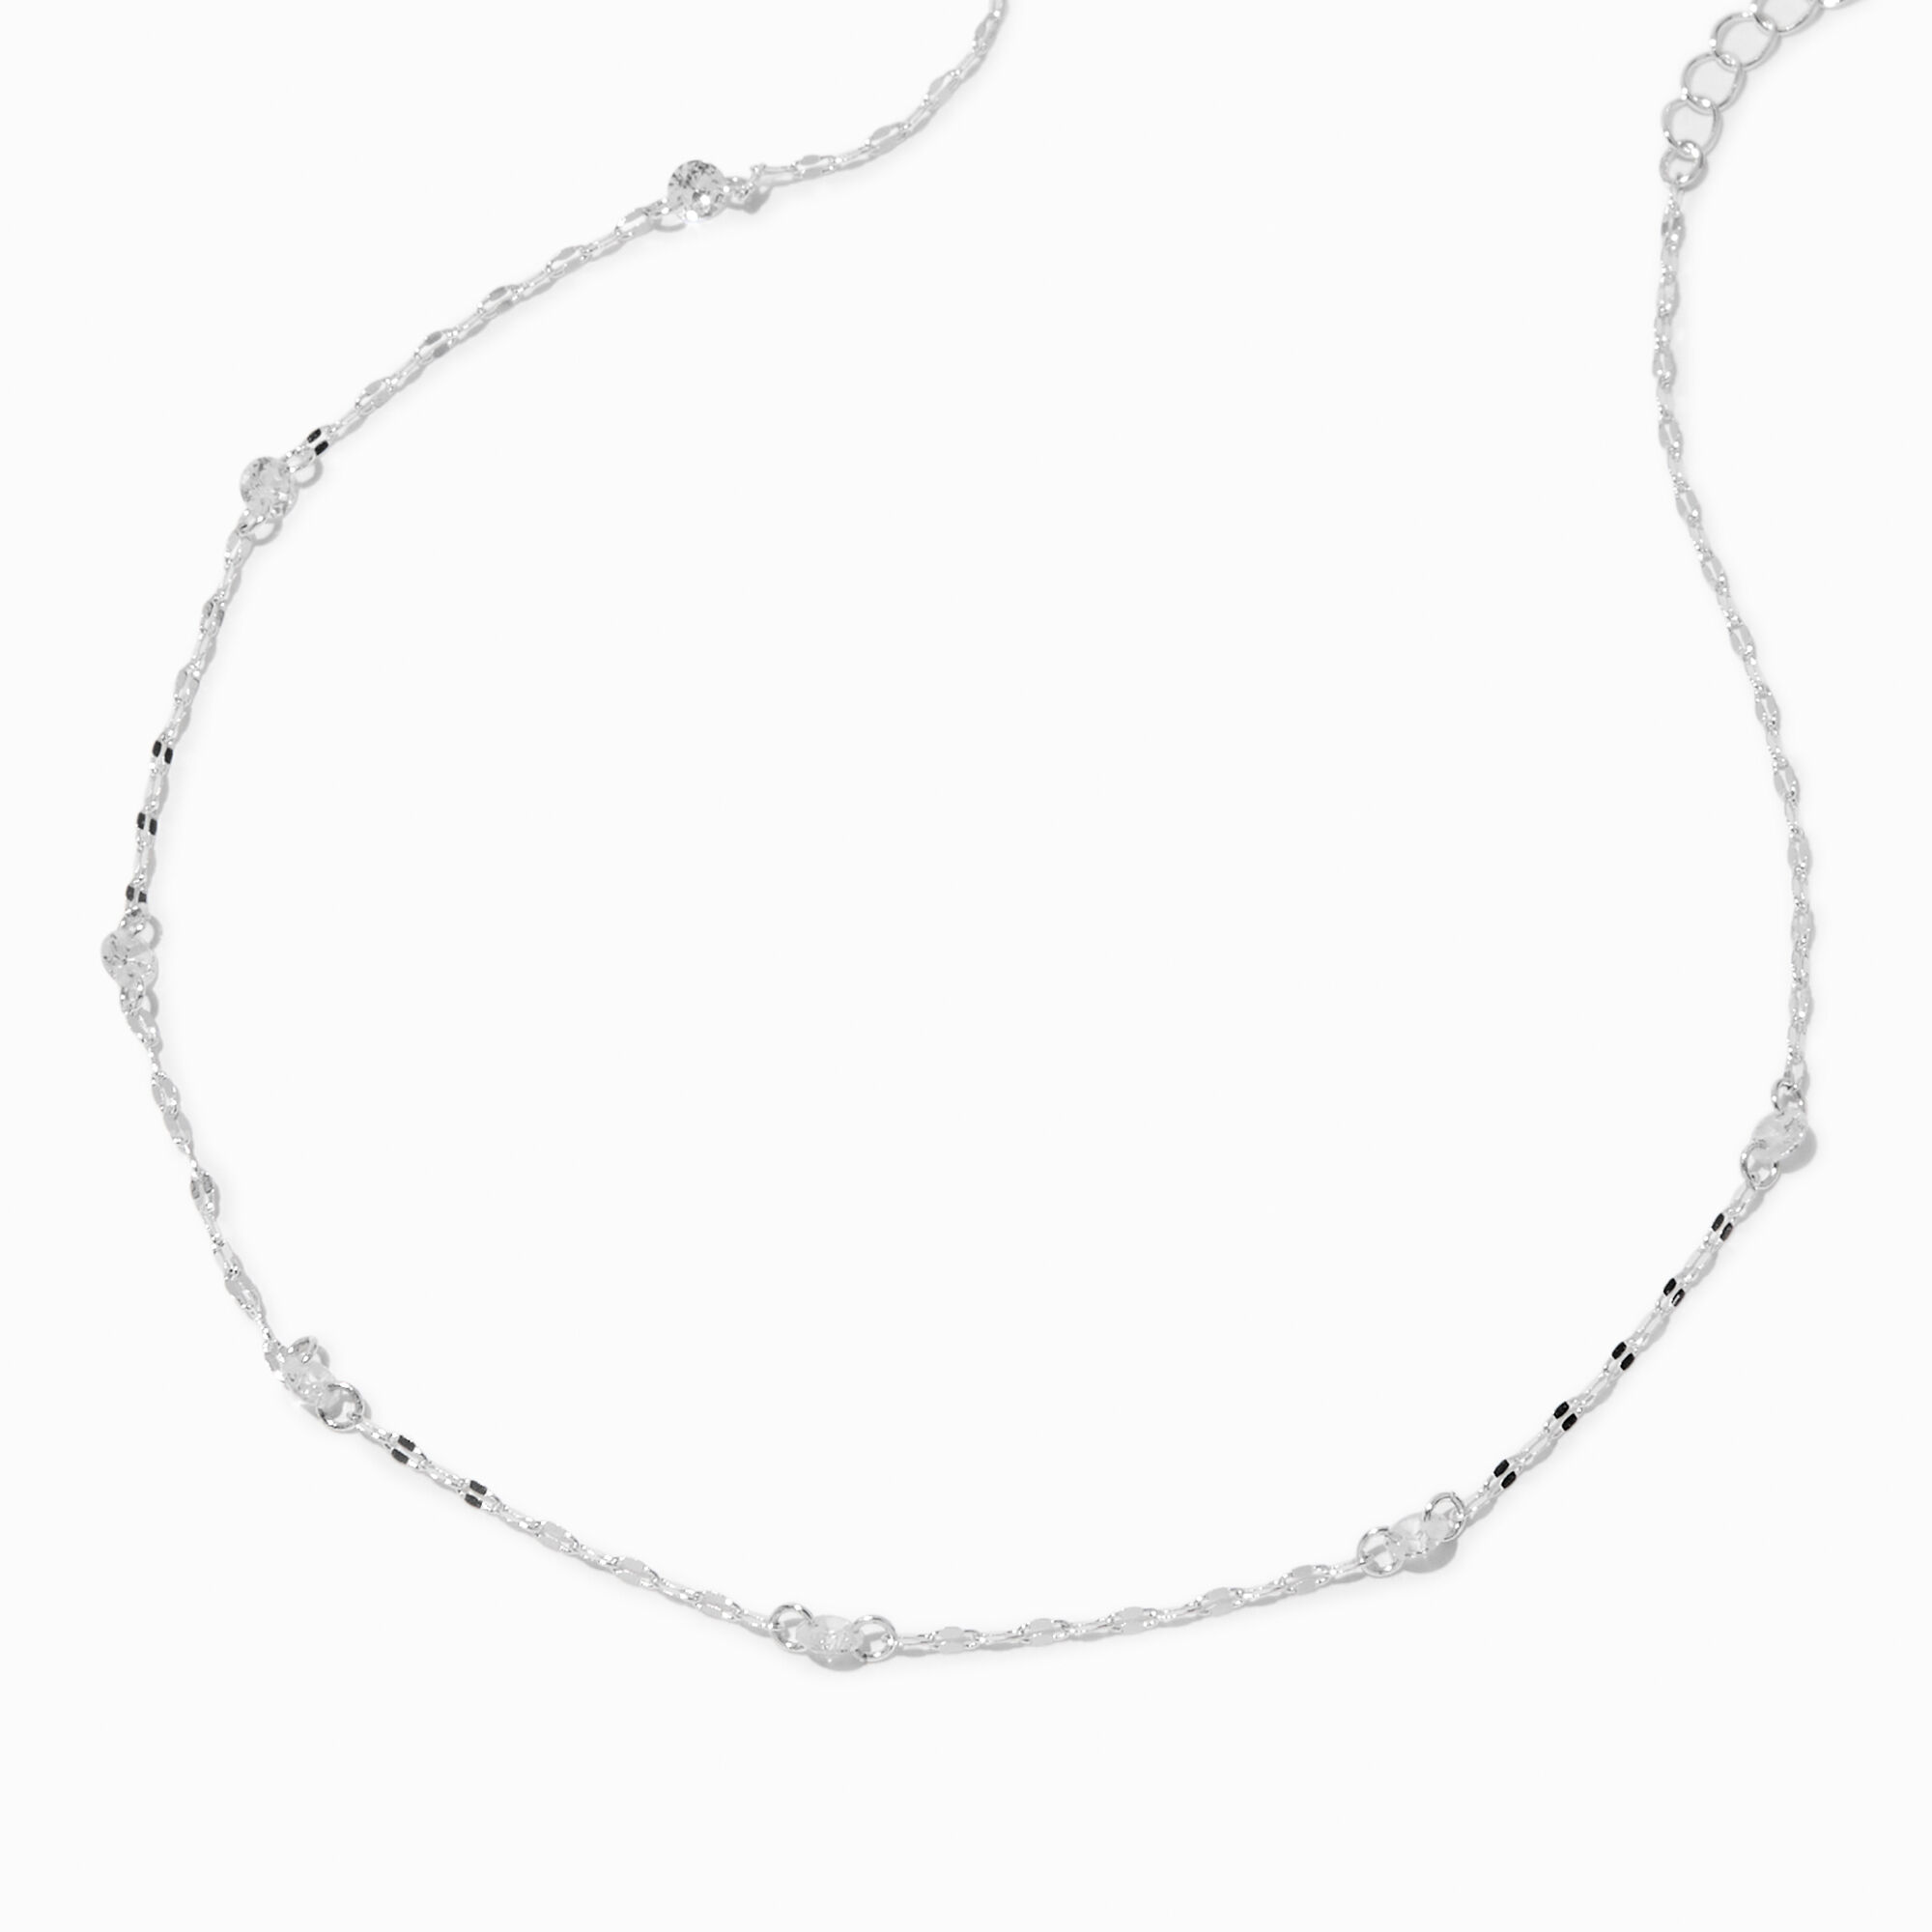 View Claires Cubic Zirconia Bead SilverTone Chain Necklace Black information